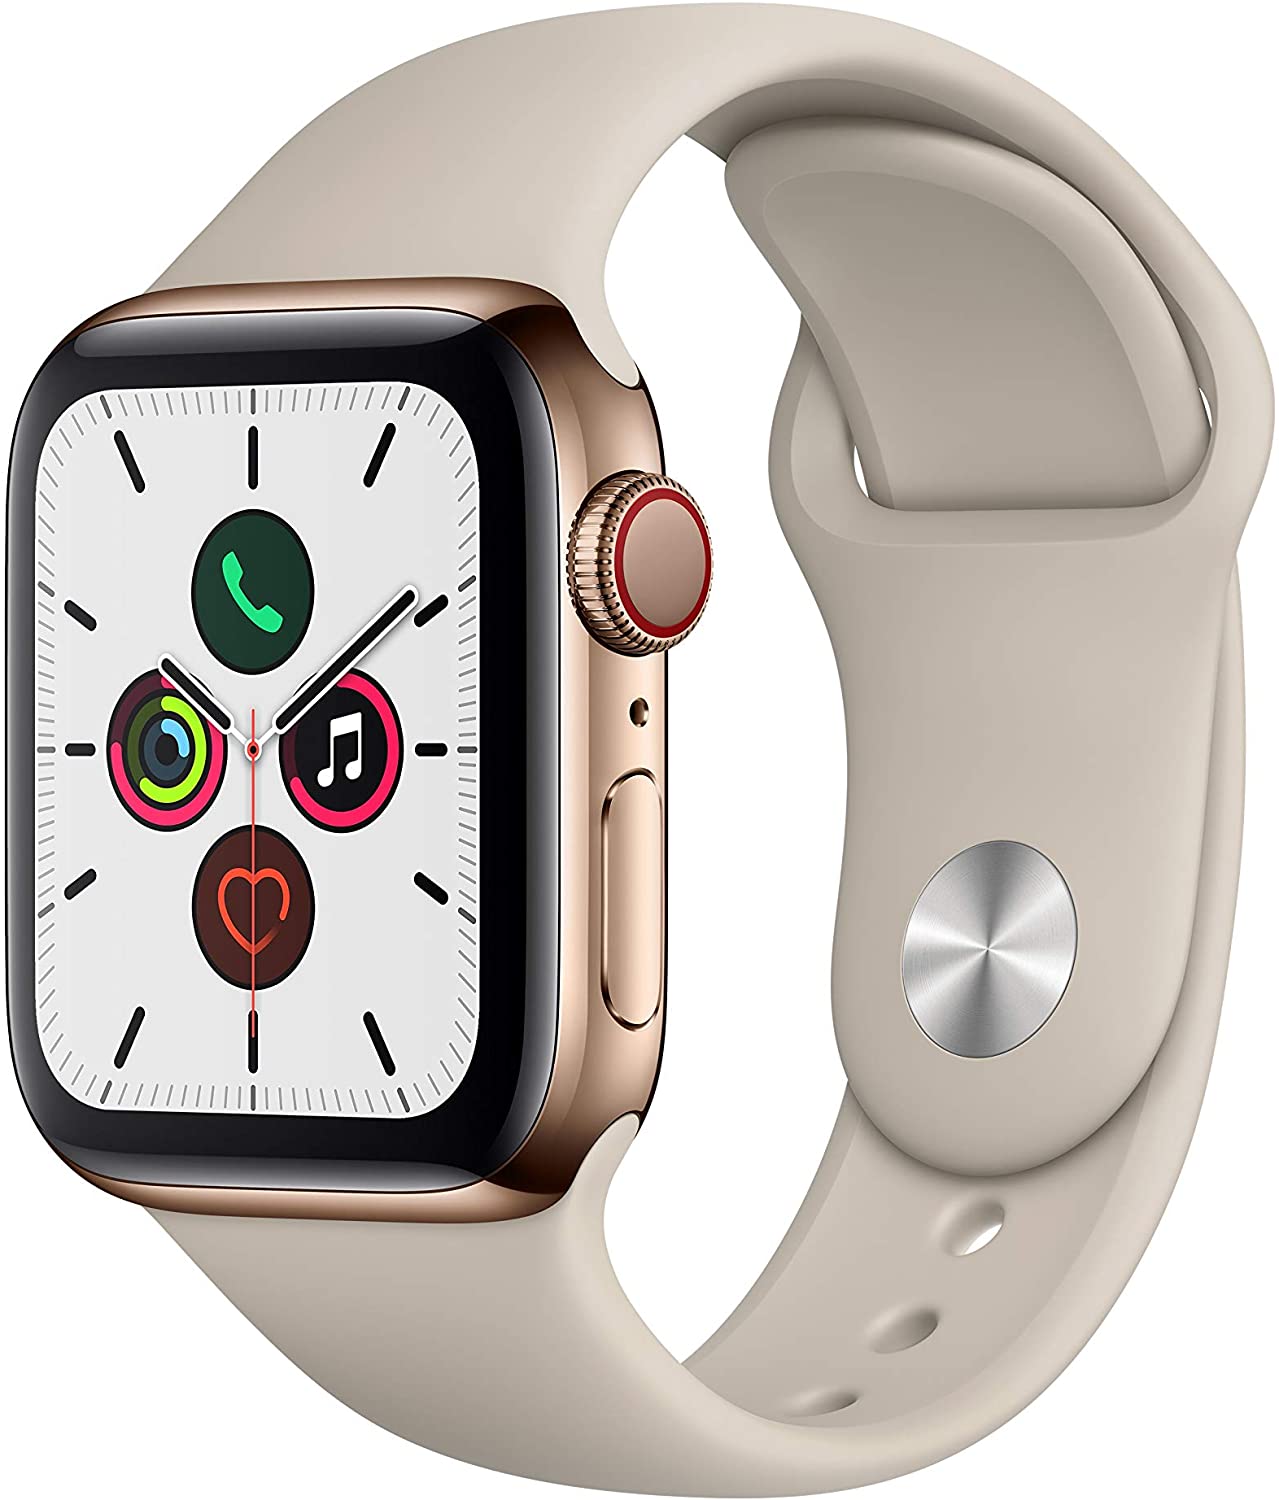 Apple Watch Series 5 (2019) 40mm GPS + Cellular - Gold Stainless Steel Case &amp; Stone Sport Band (Refurbished)